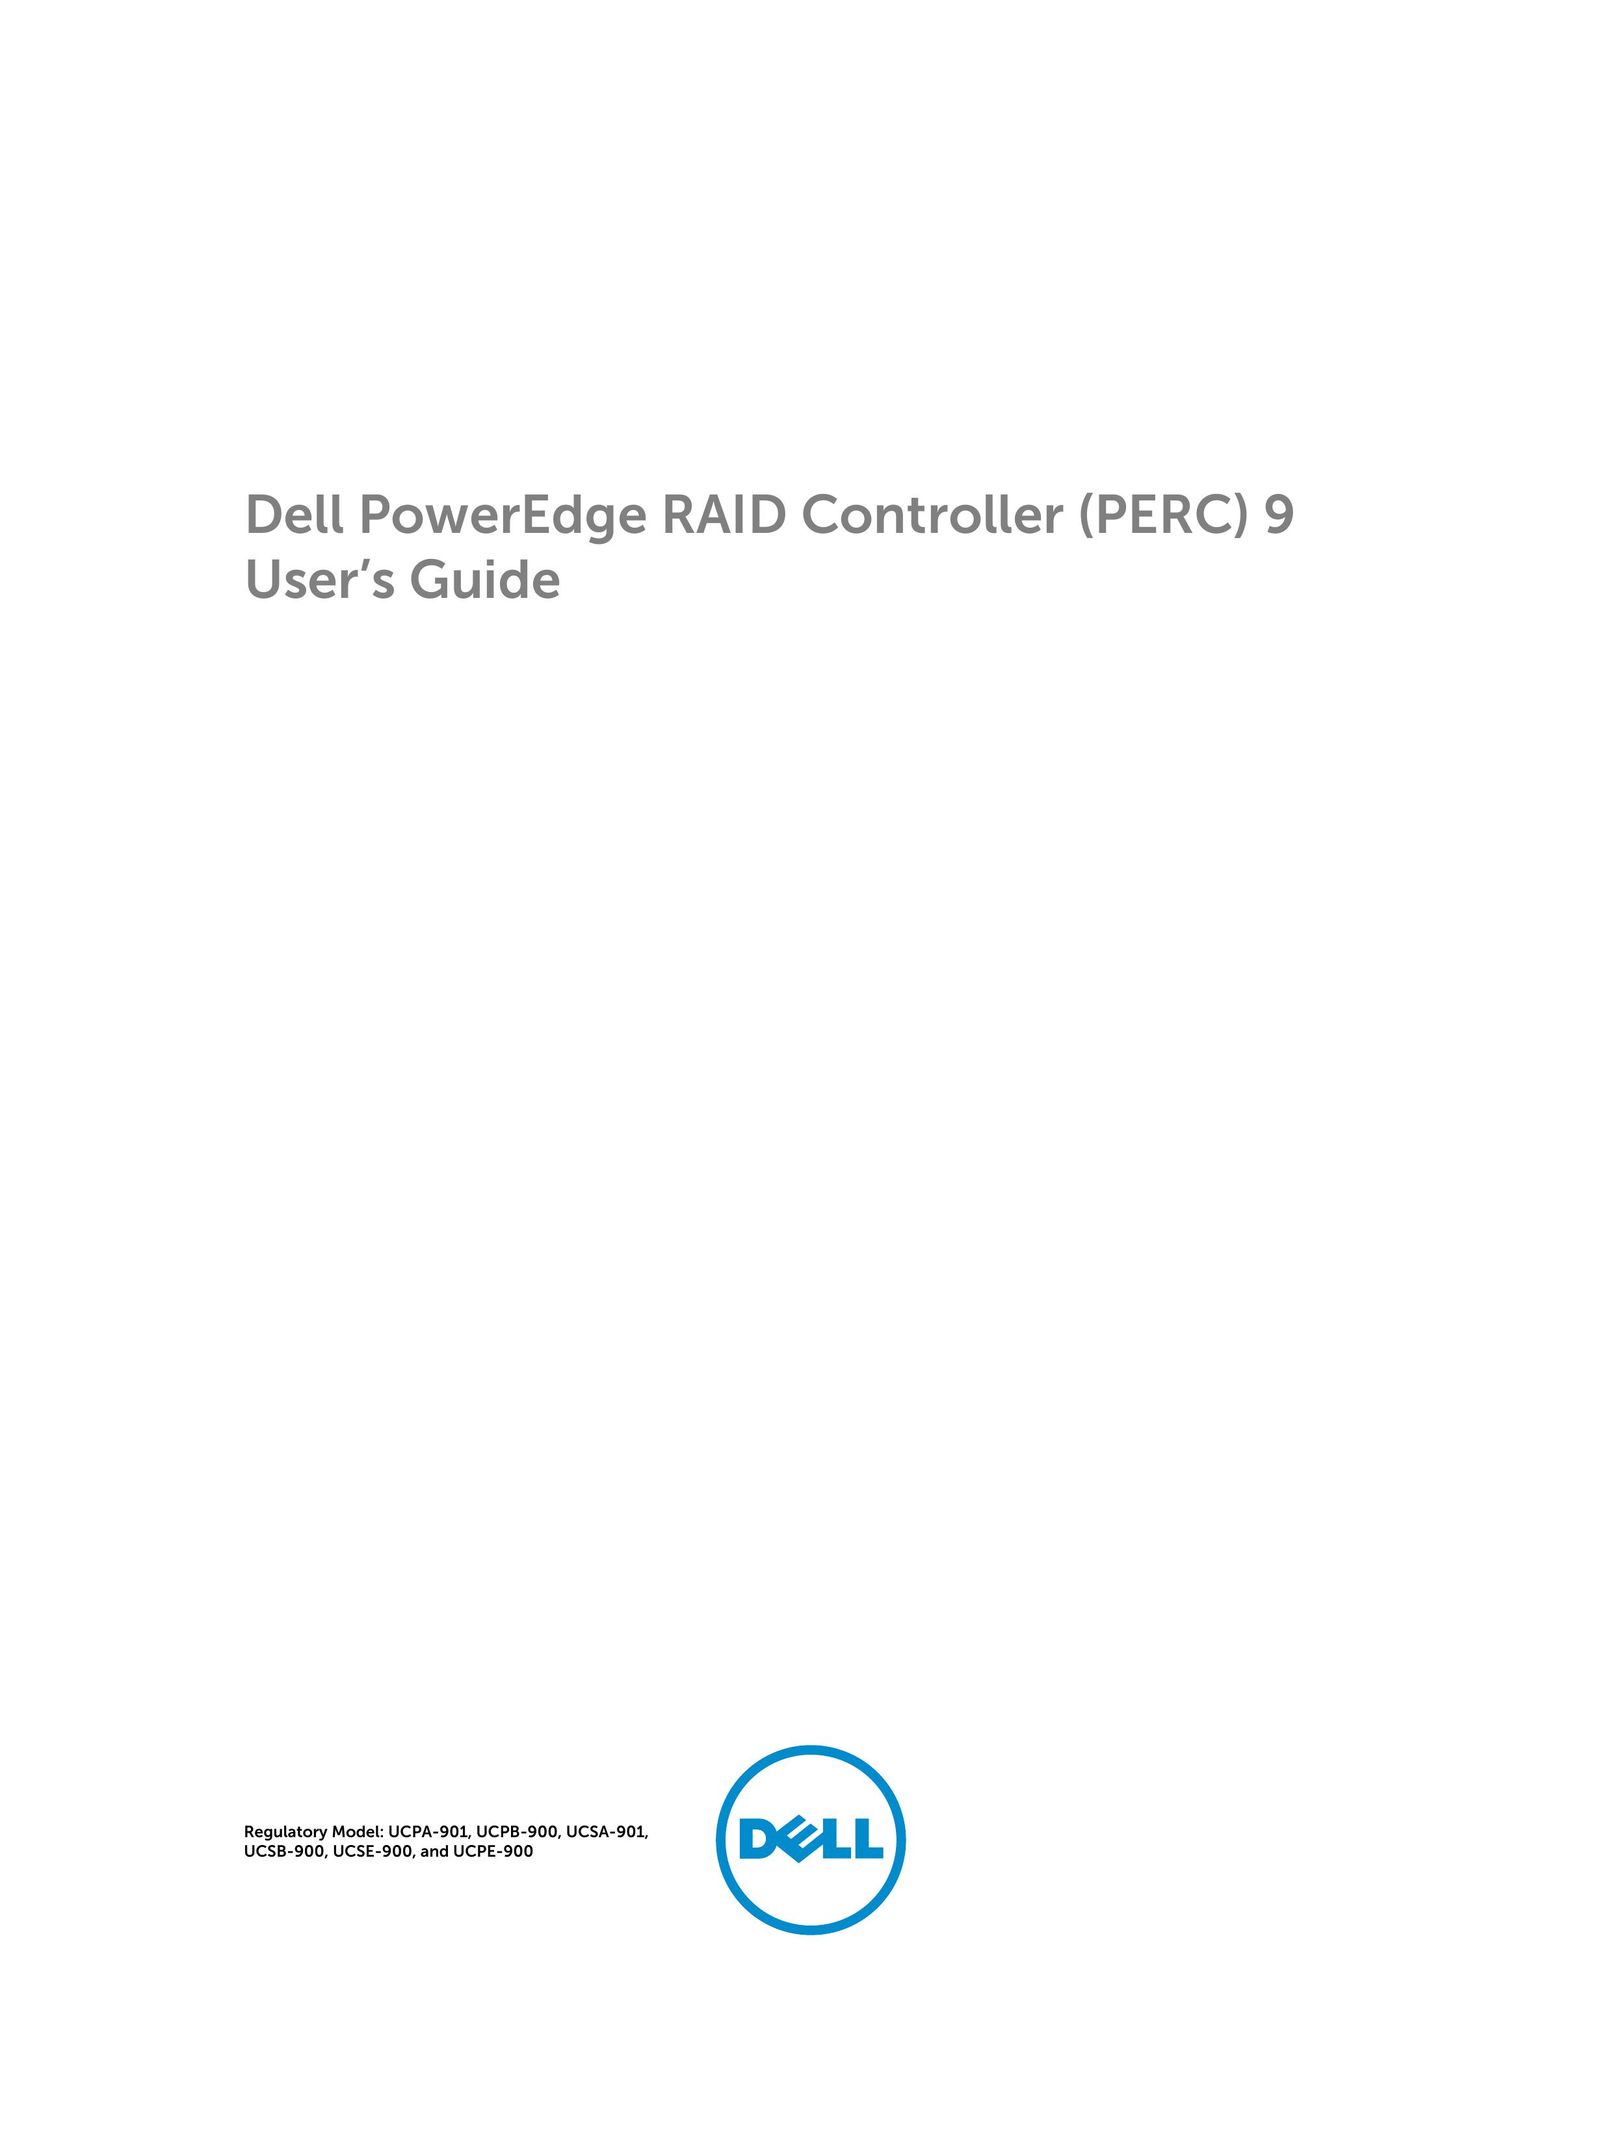 Dell and UCPE-900 Computer Hardware User Manual